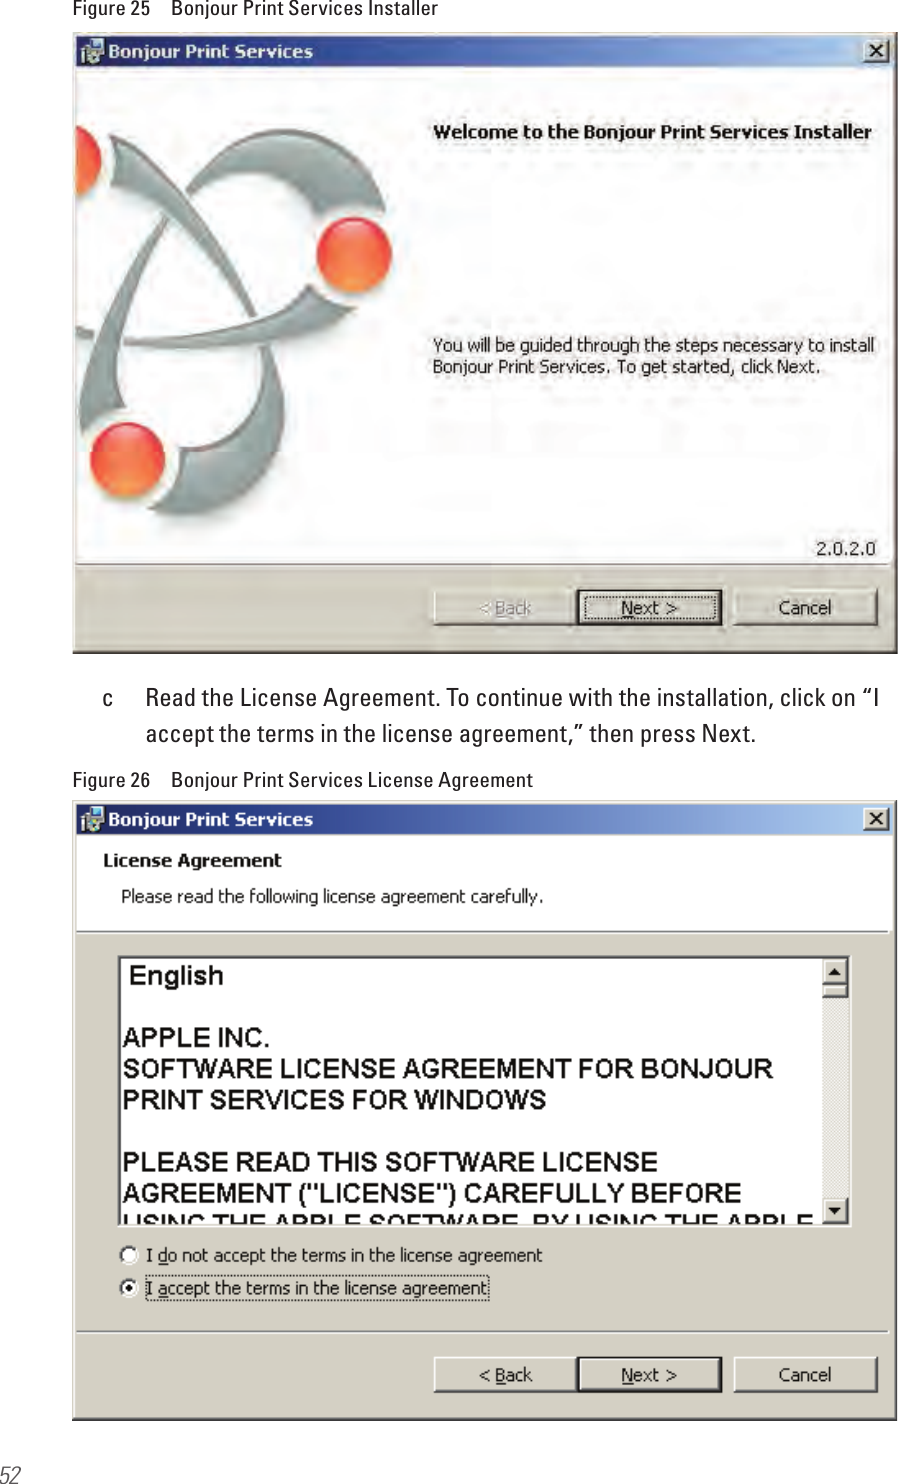 52Figure 25  Bonjour Print Services Installerc  Read the License Agreement. To continue with the installation, click on “I accept the terms in the license agreement,” then press Next.Figure 26  Bonjour Print Services License Agreement